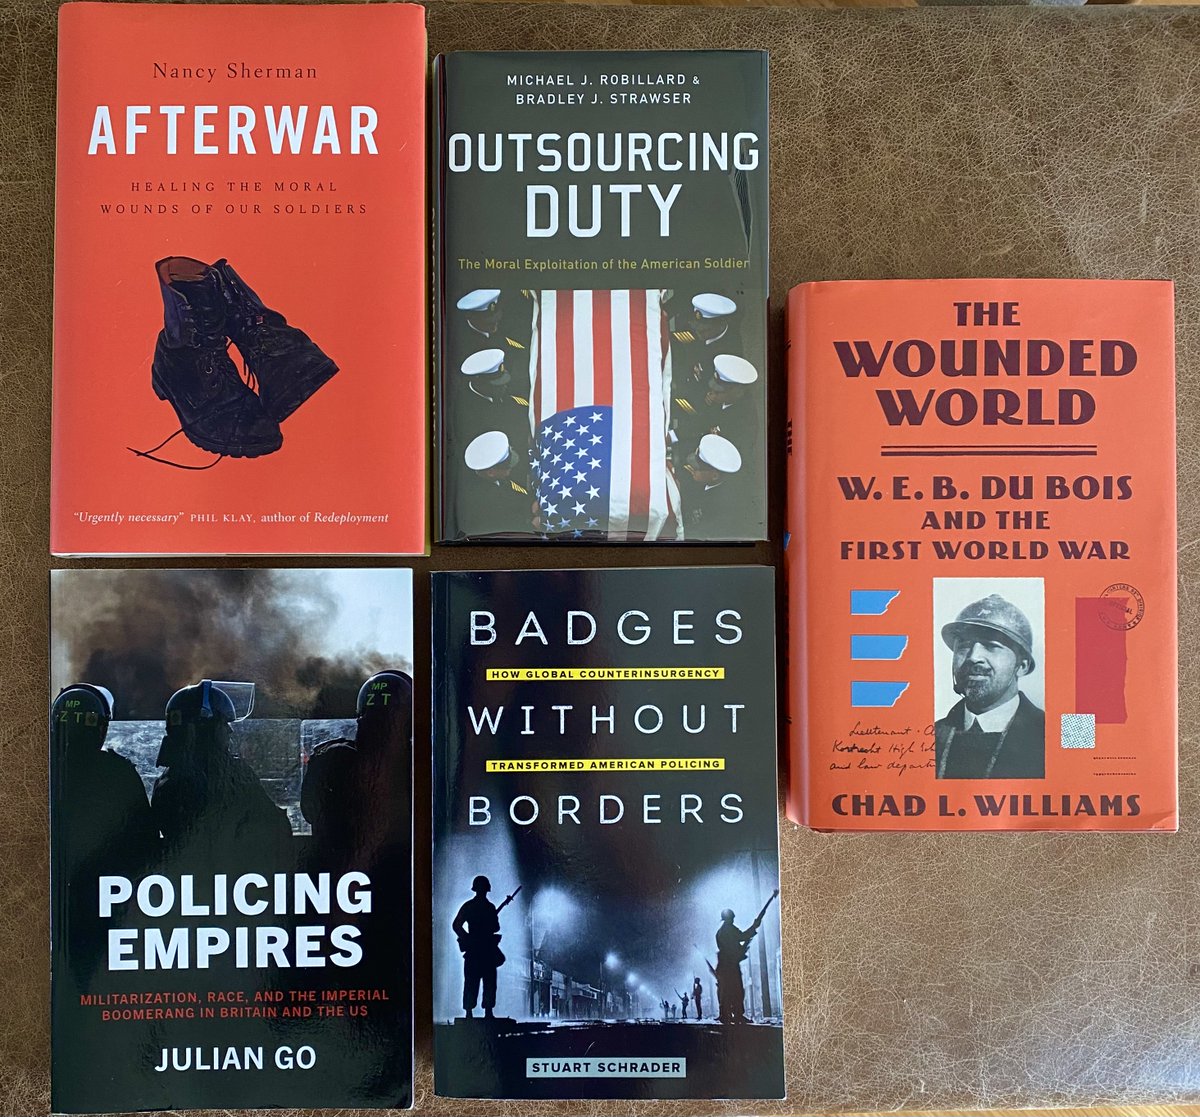 Next 5 on the pro reading list. Prepping for @MilHist_Lee's SMH VP panel w/ really great reads from @stschrader1 & @jgo34. @drnancysherman argues passionately that vet reintegration is a matter for all of us. And @Dr_ChadWilliams just flies as a storyteller. Highly recommend.